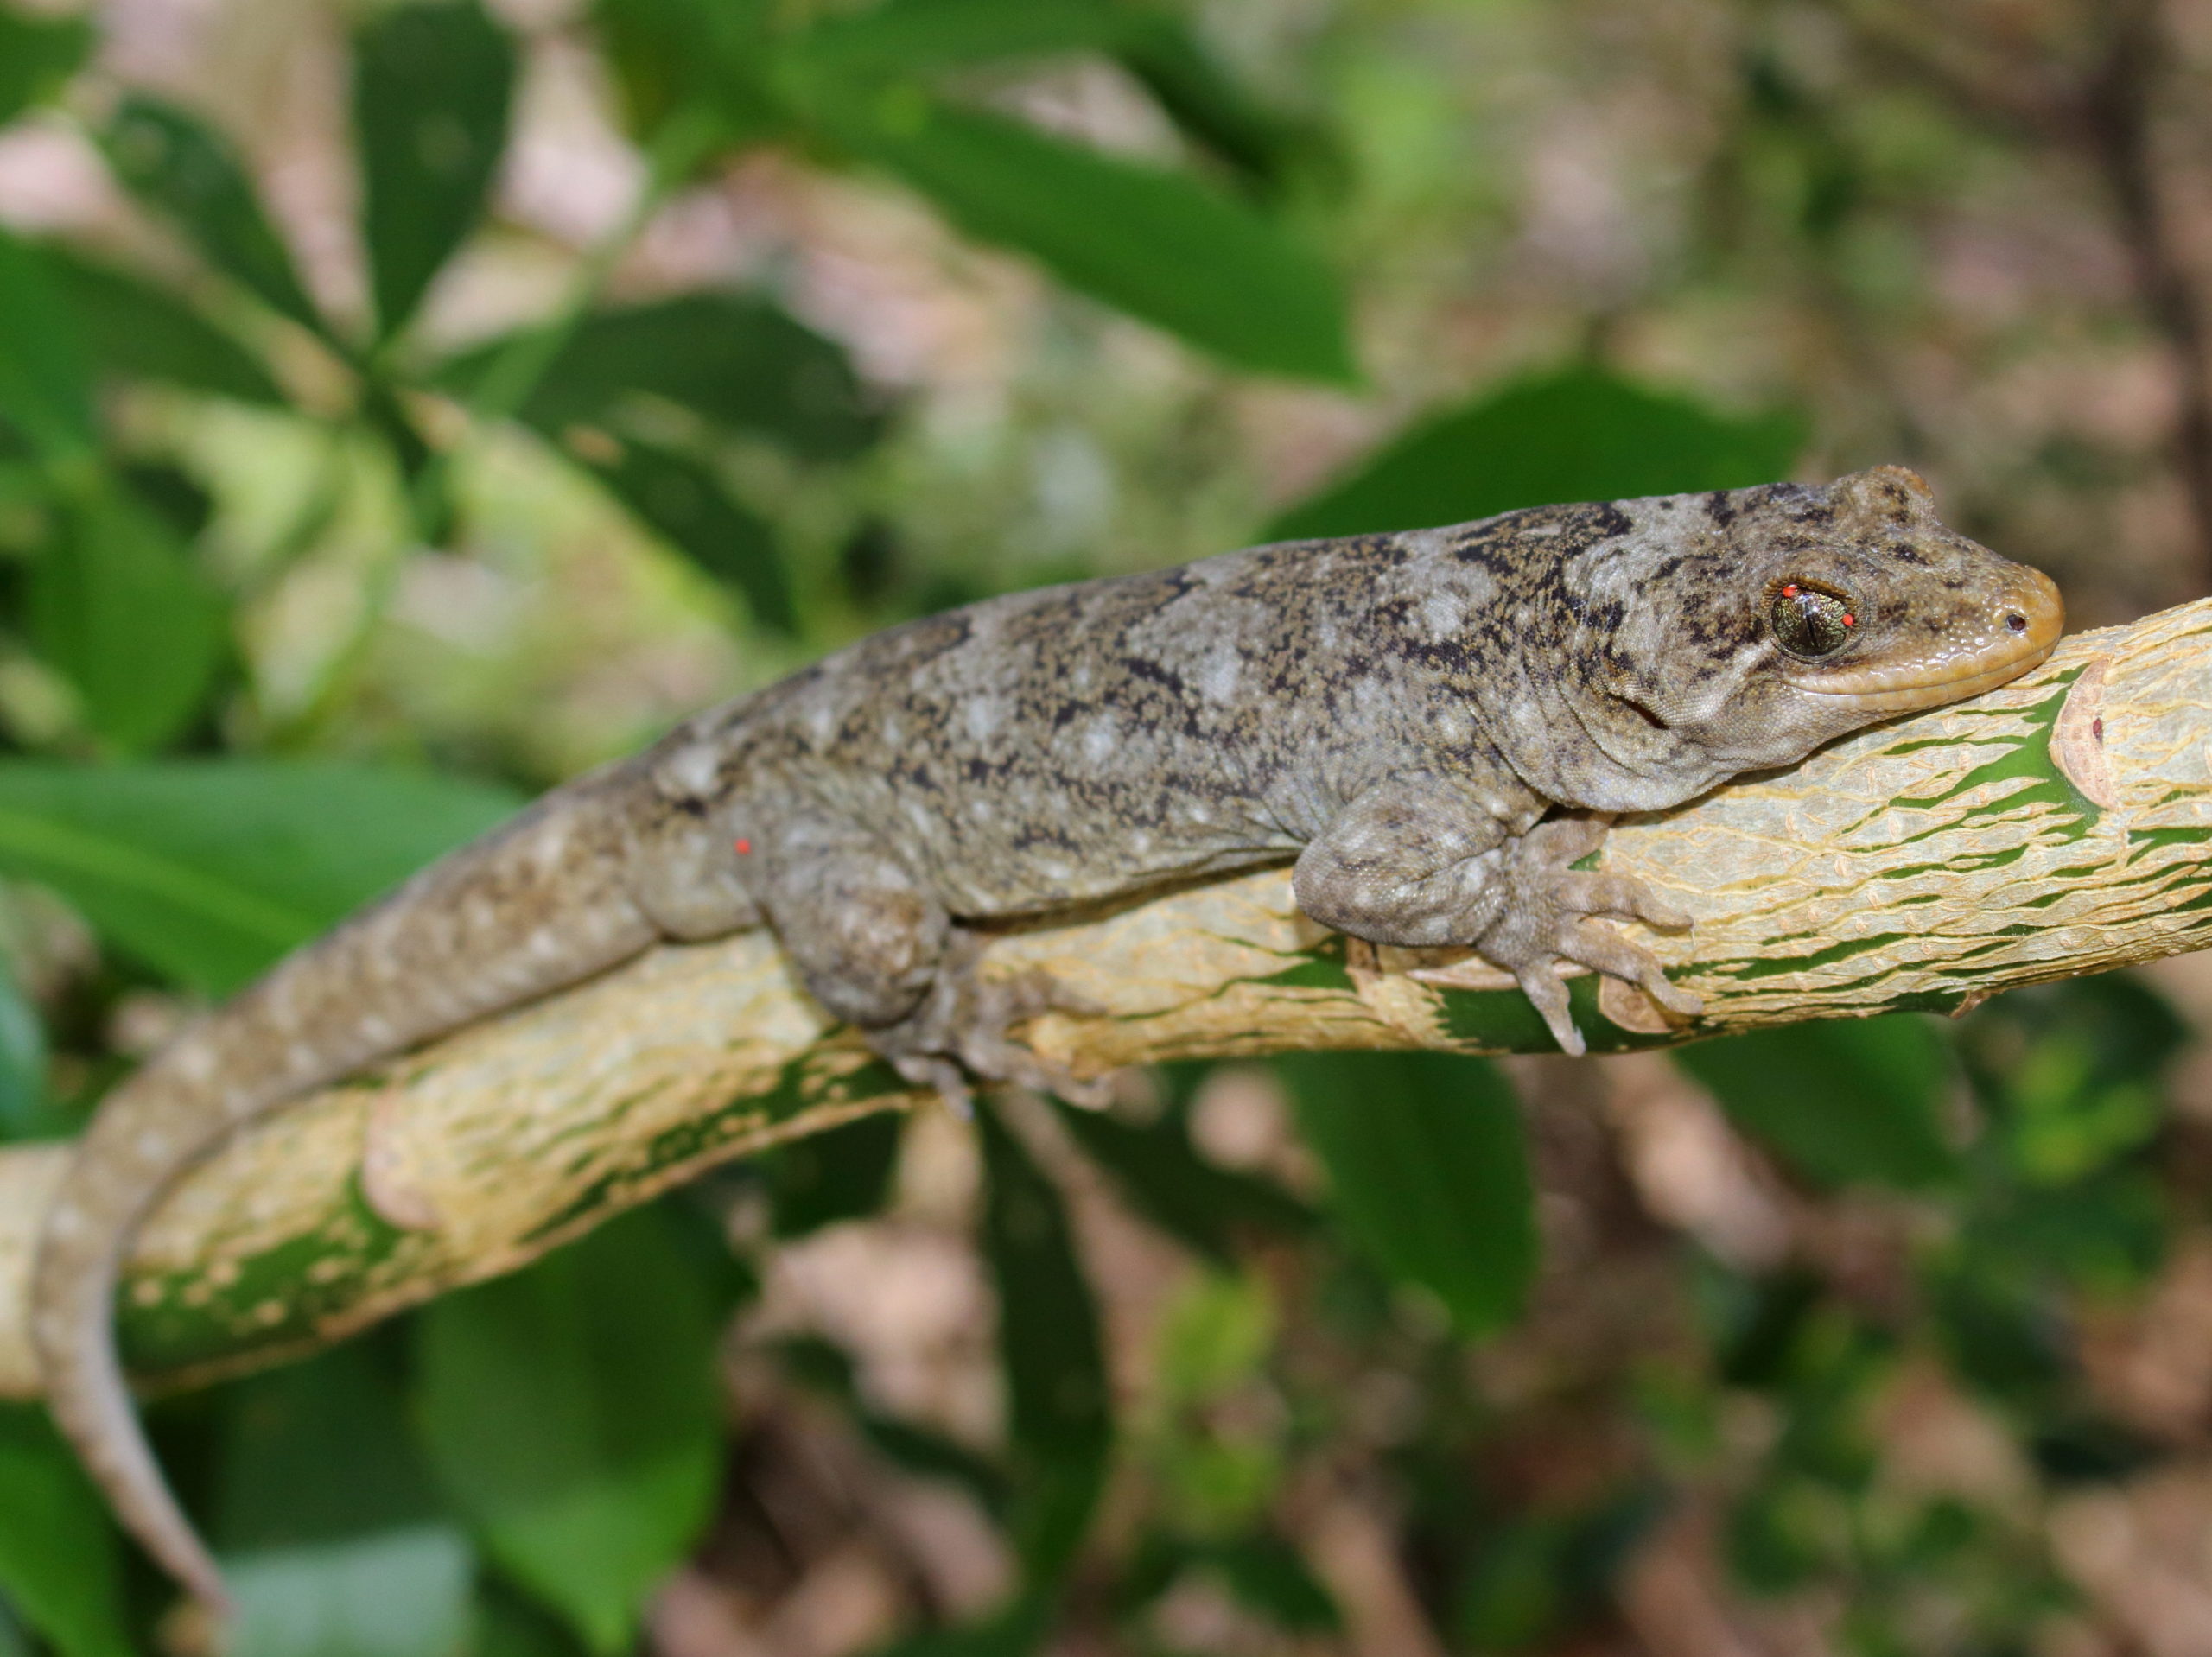 a large gecko on a branch